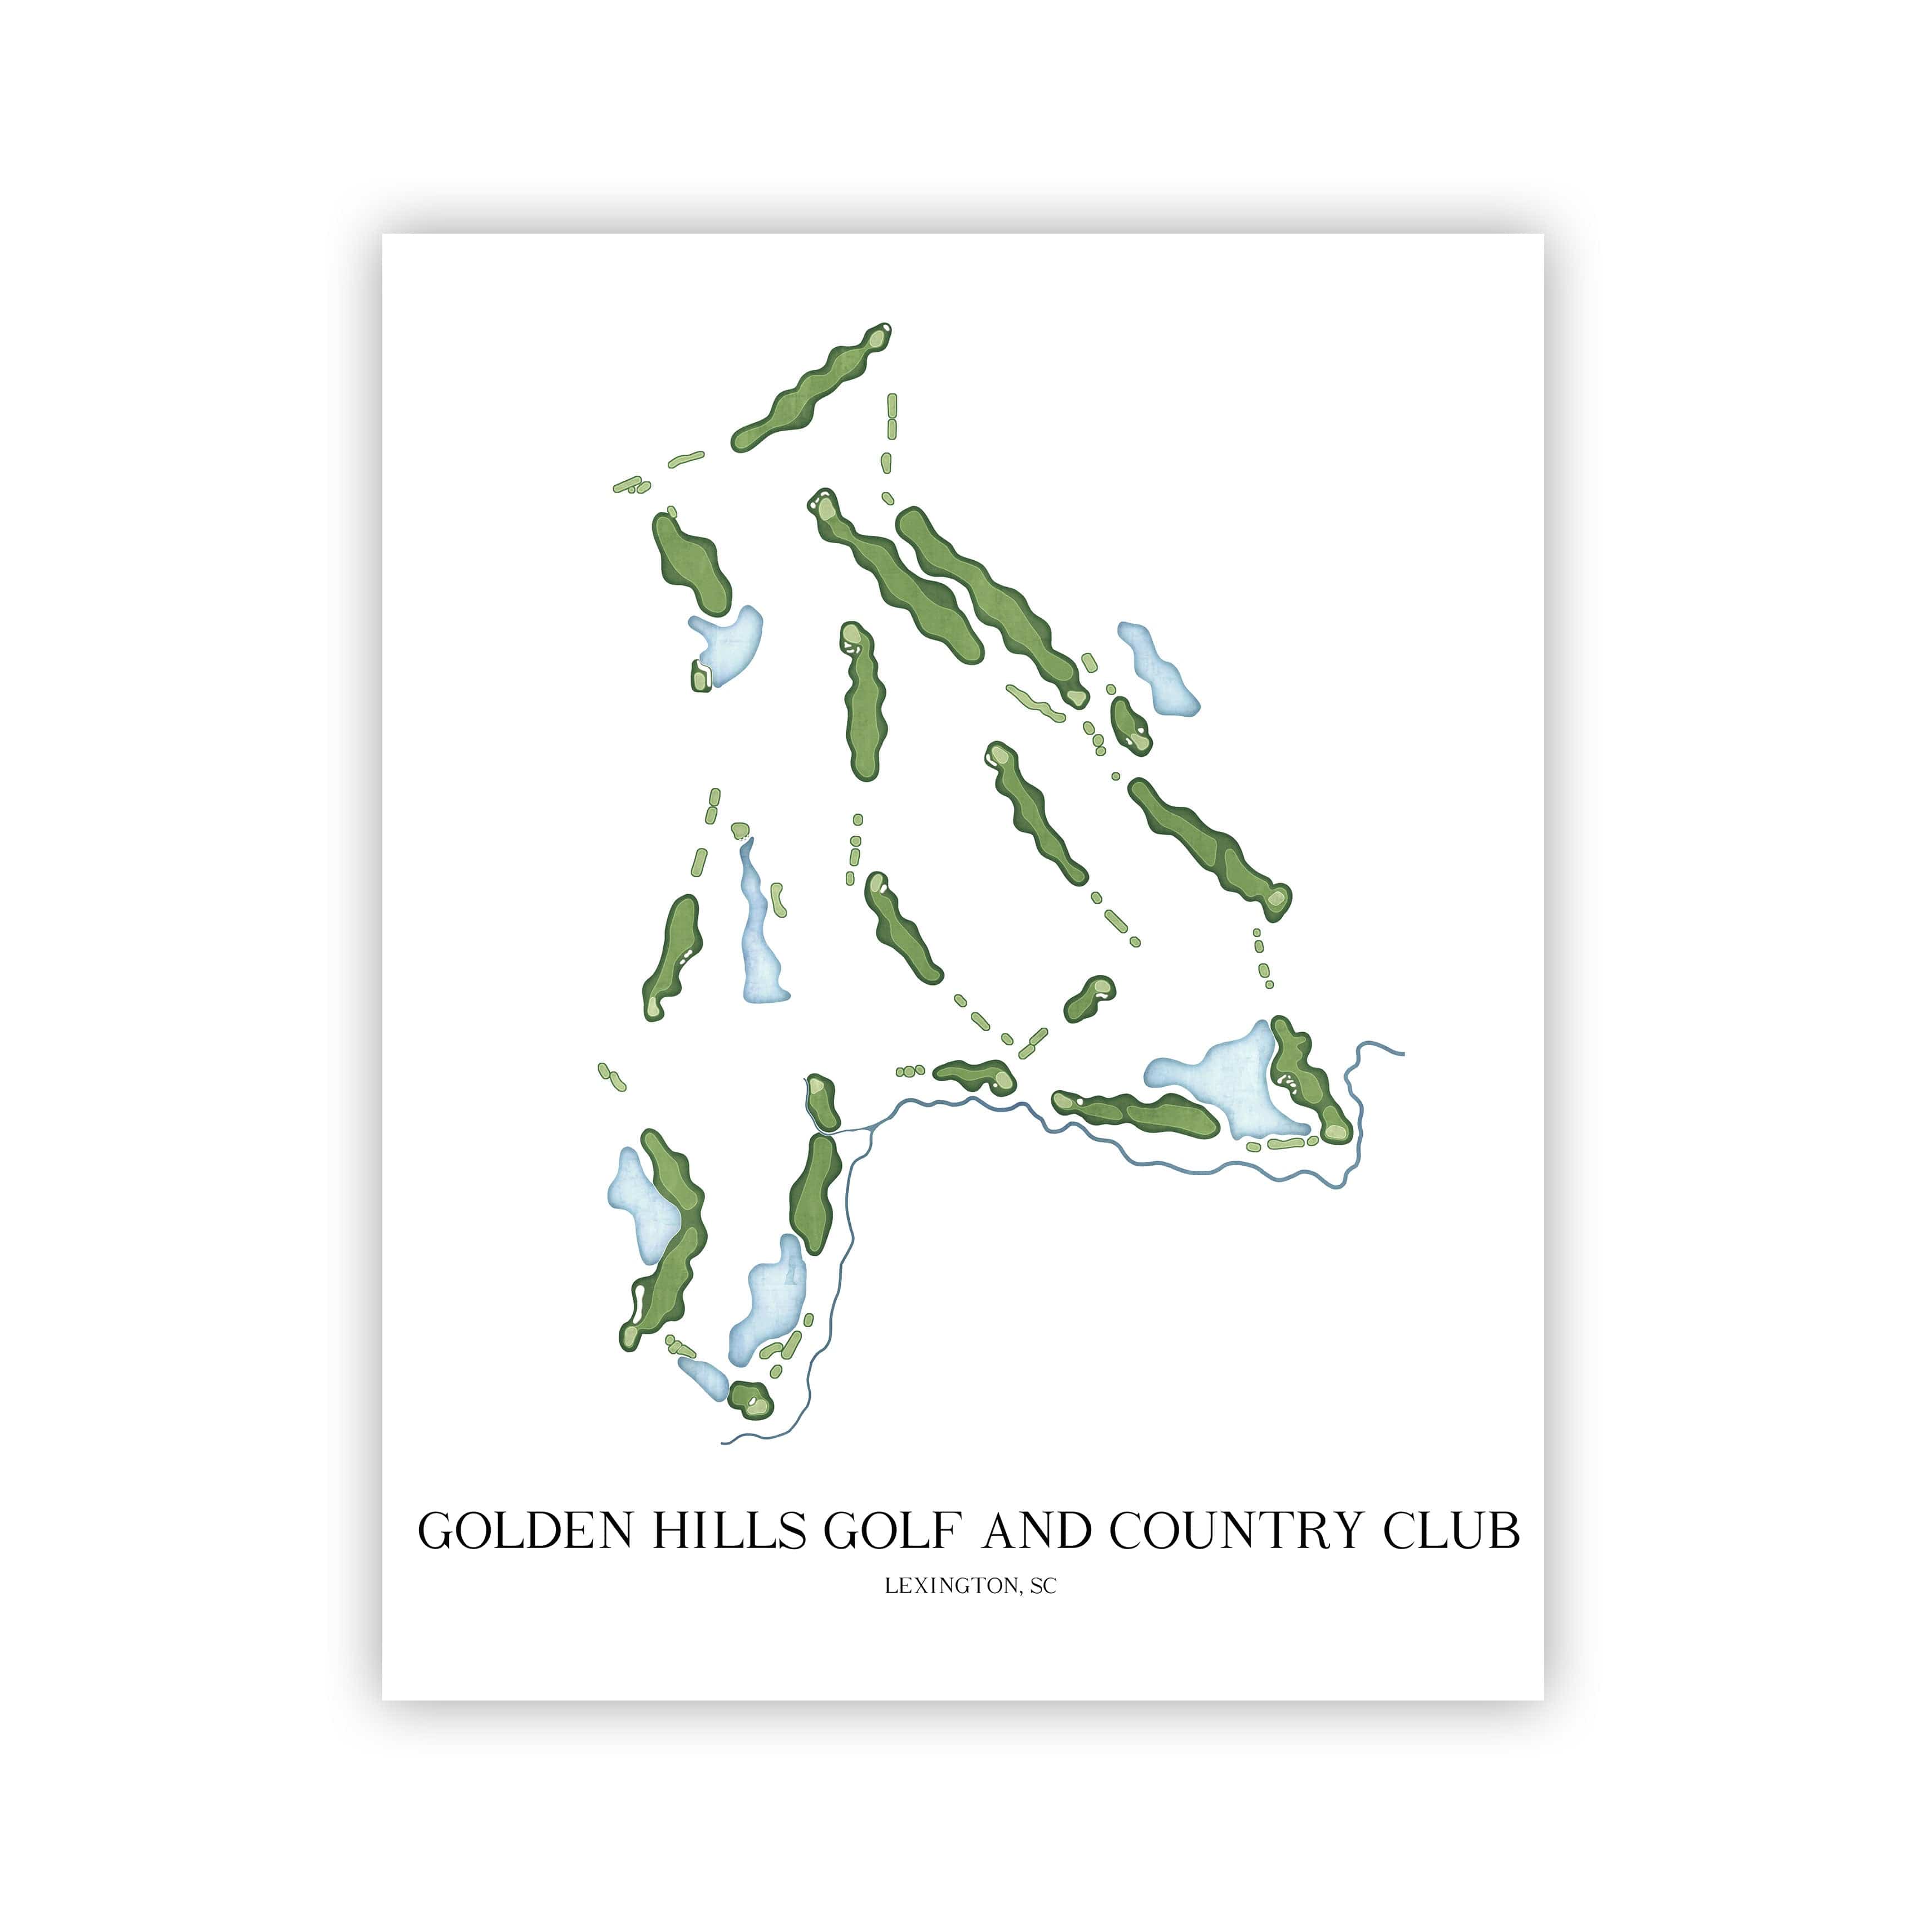 The 19th Hole Golf Shop - Golf Course Prints -  Golden Hills Golf and Country Club Golf Course Map